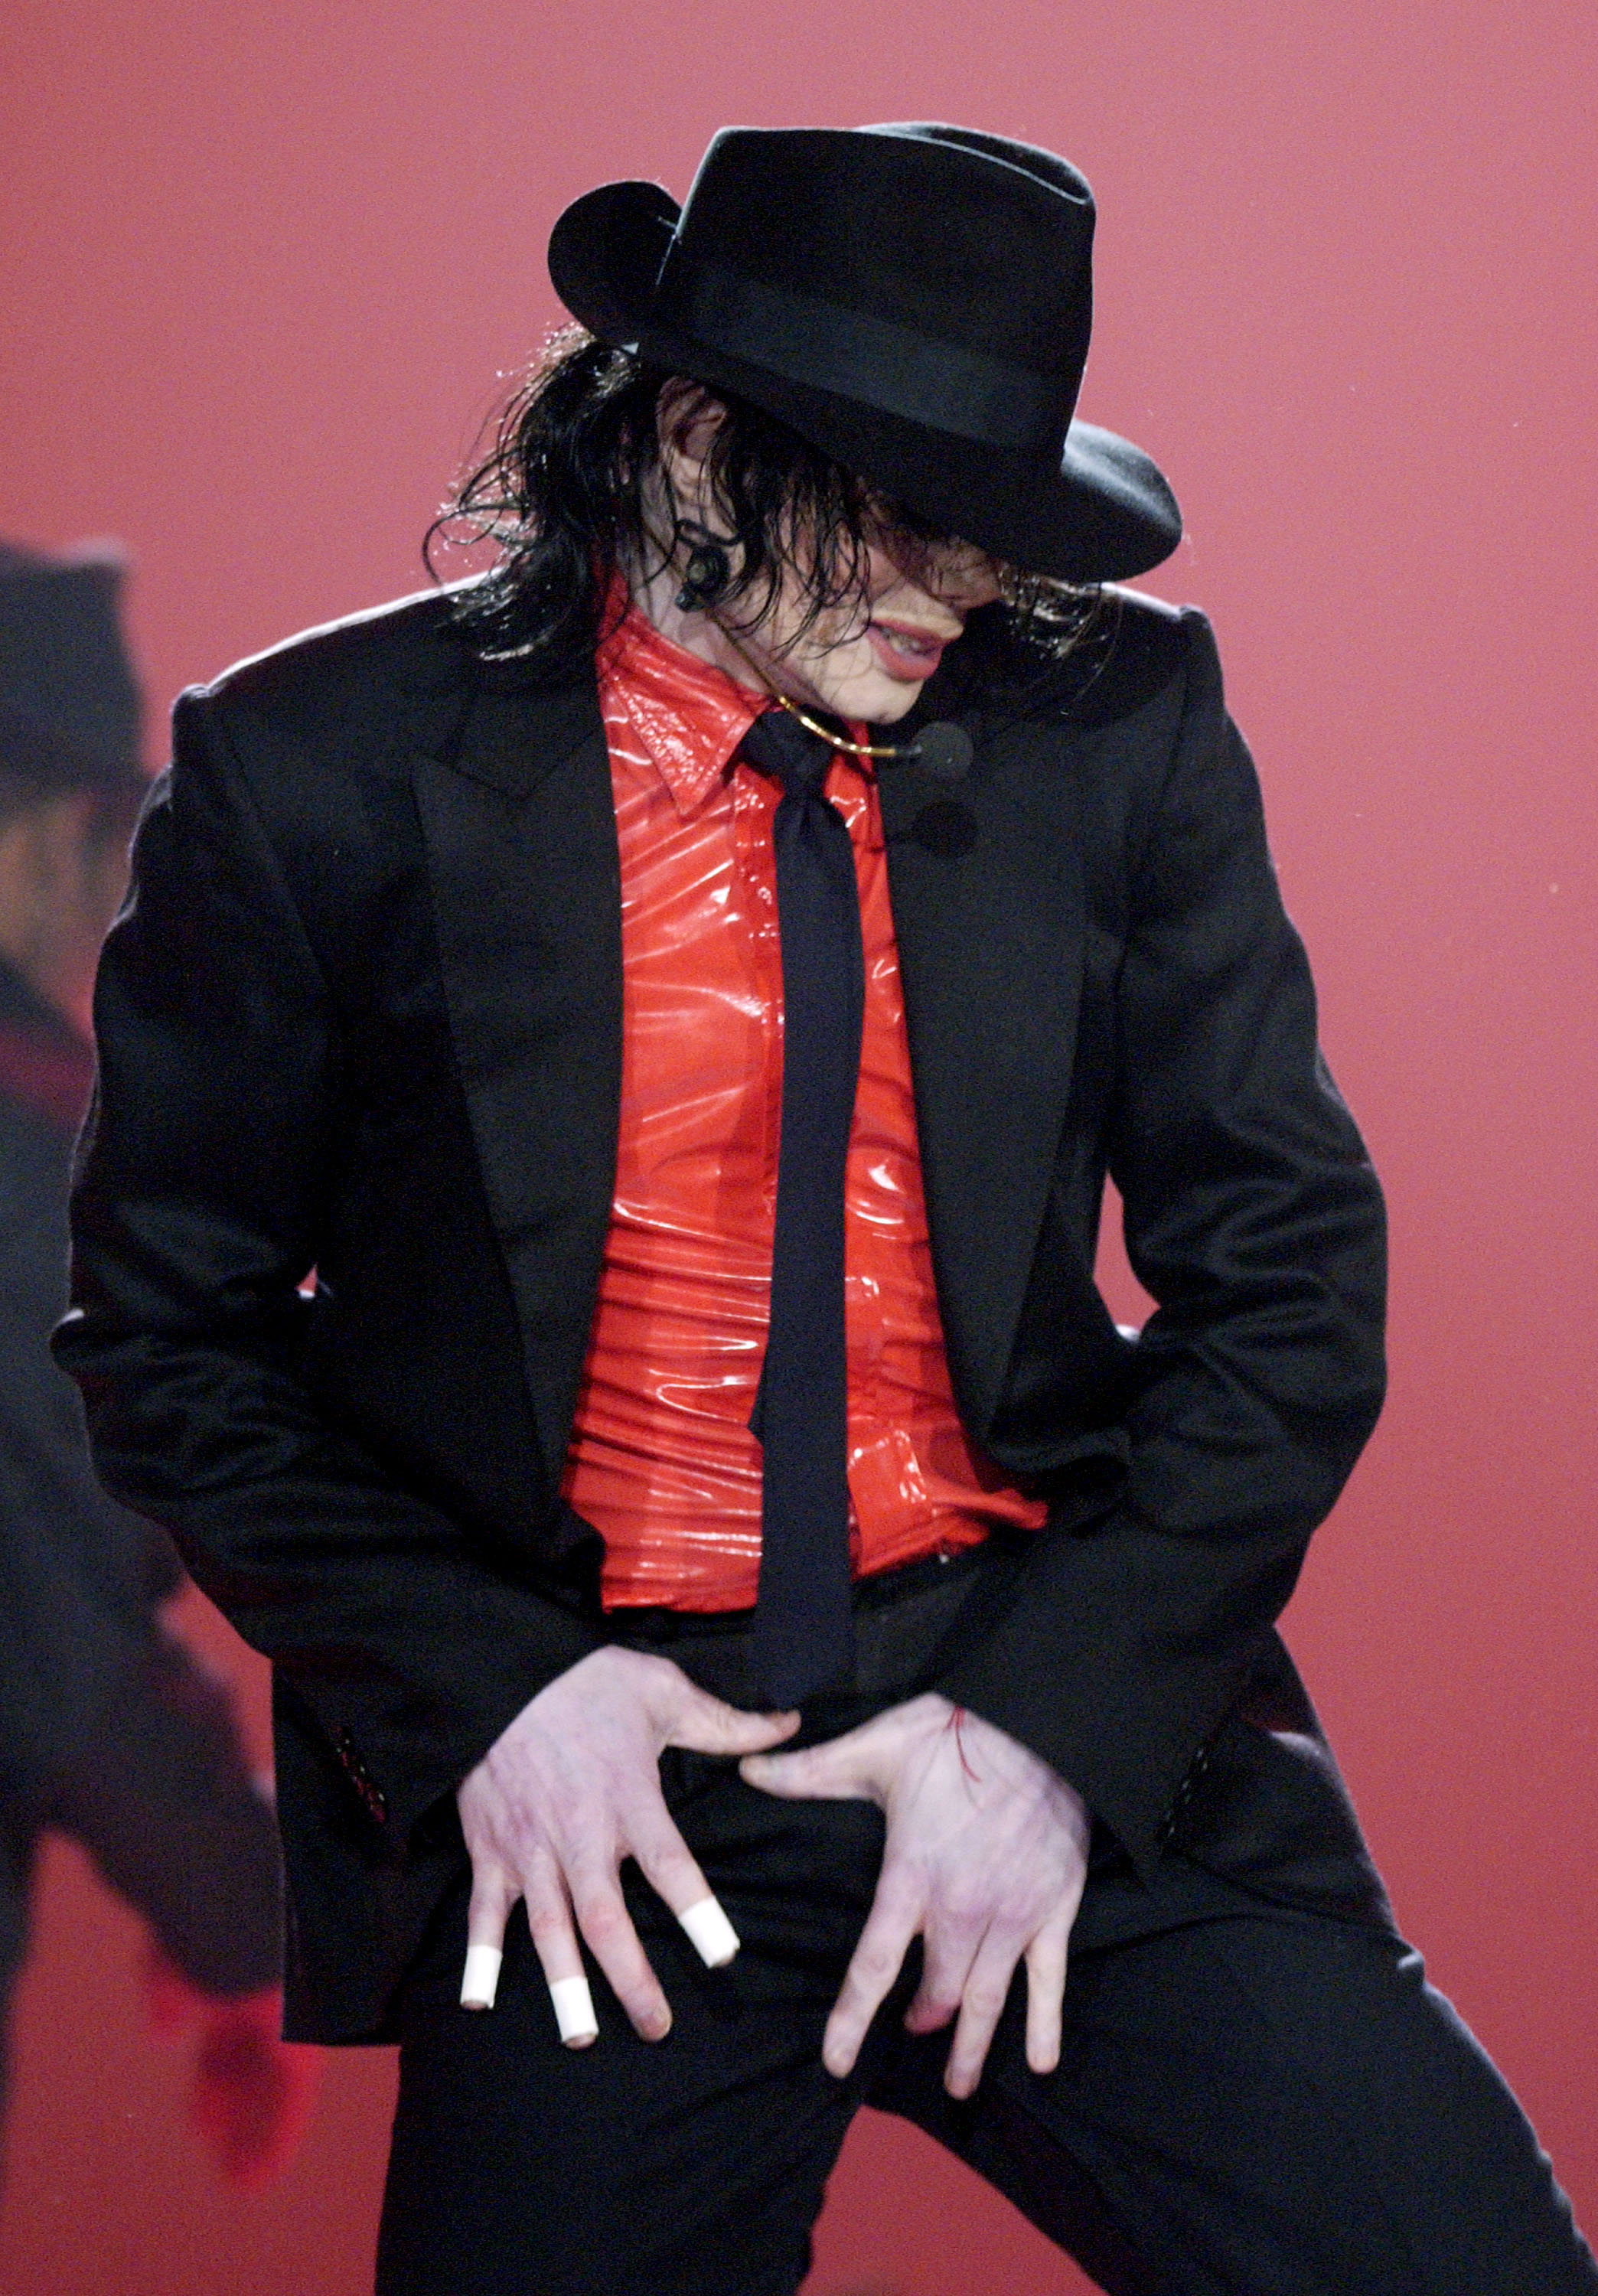 Michael Jackson performs on stage on May 3, 2002 | Source: Getty Images